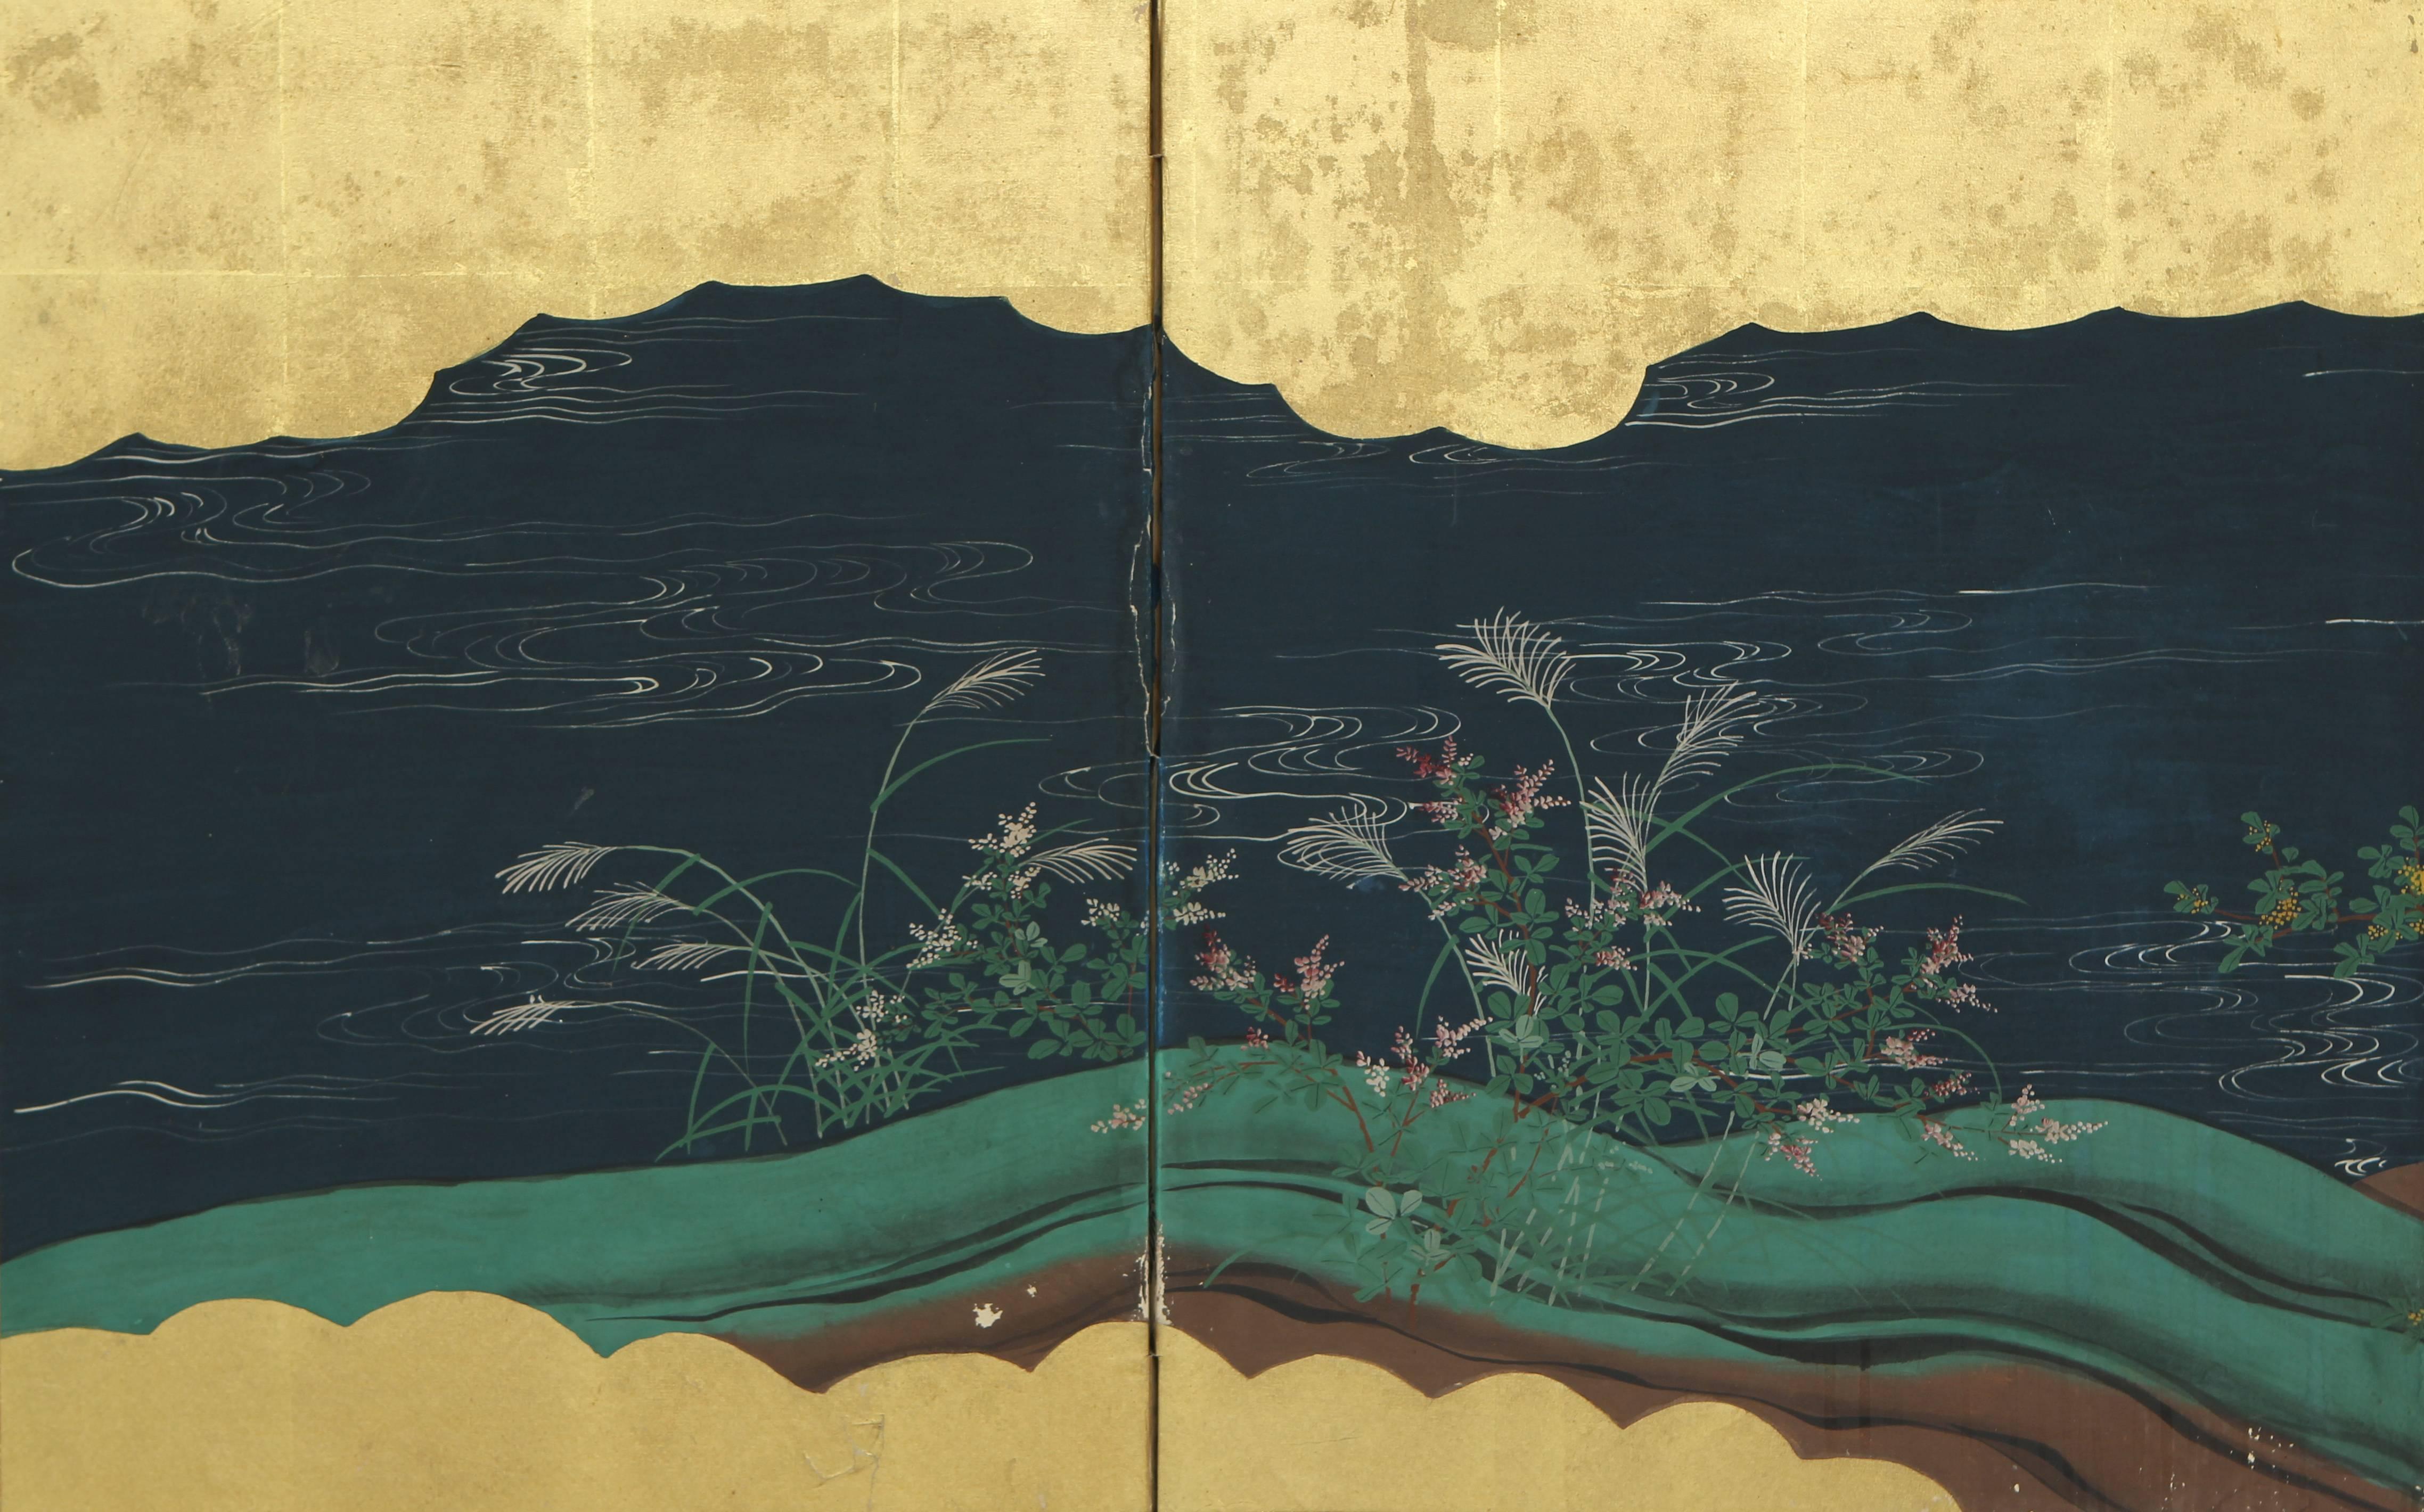 Six-panel folding screen with blooming flowers and autumn grasses on grassy banks by a stream. Painting in ink and mineral colors on paper with gold leaf.